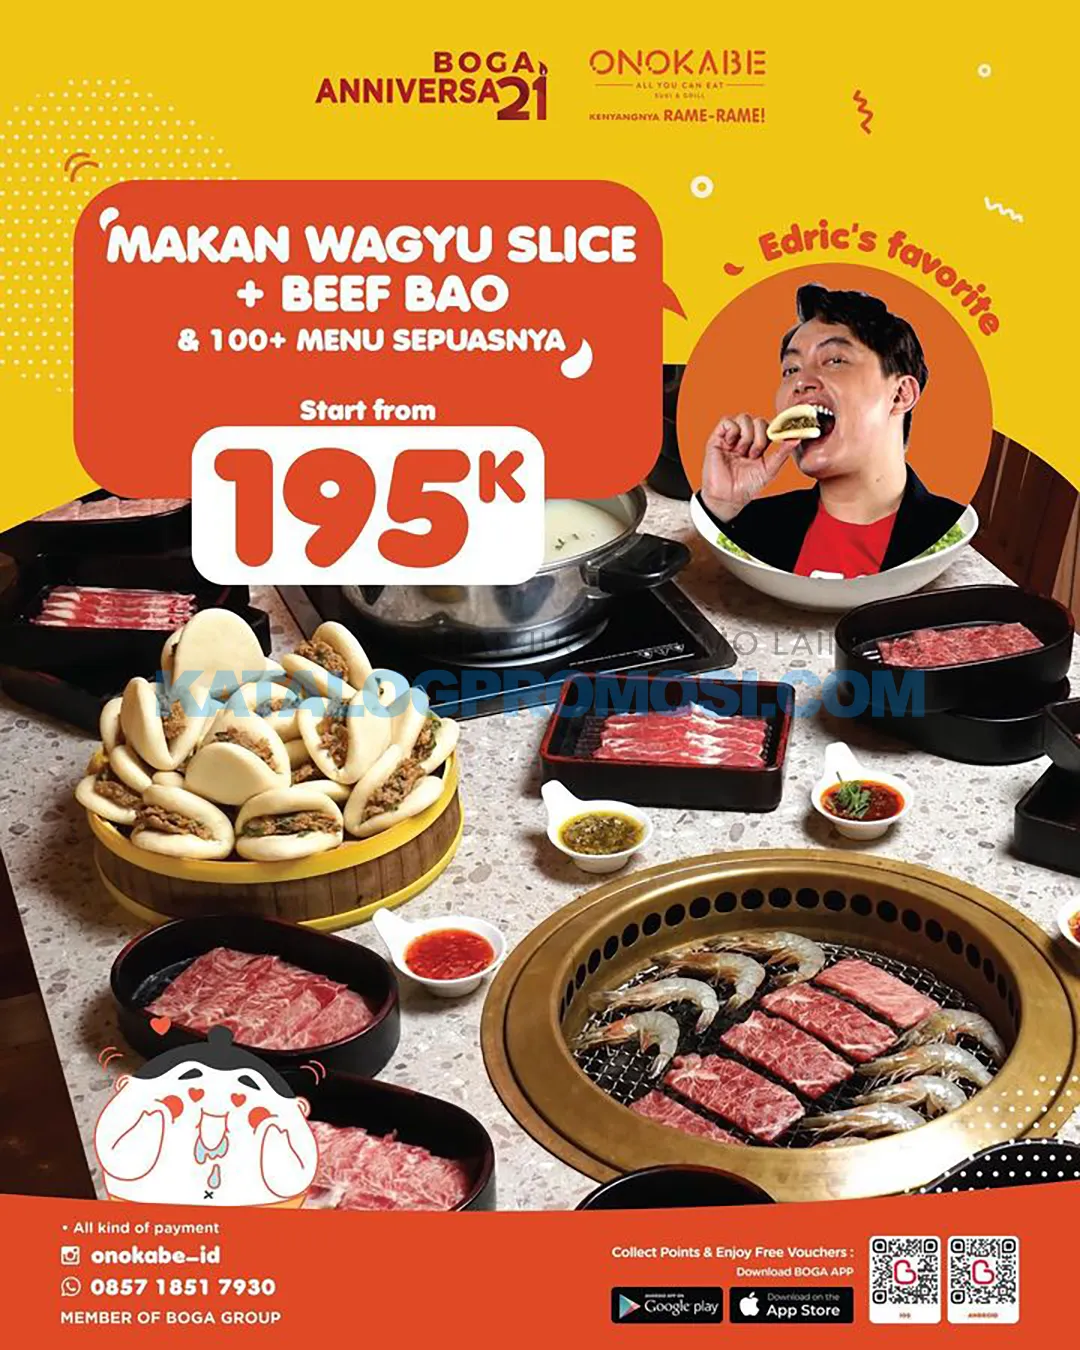 Promo ONOKABE SPECIAL 21 ANNIVERSARY BOGA GROUP - ALL YOU CAN EAT Wagyu Slice & Beef Bao SEPUASNYA mulai Rp. 195.000